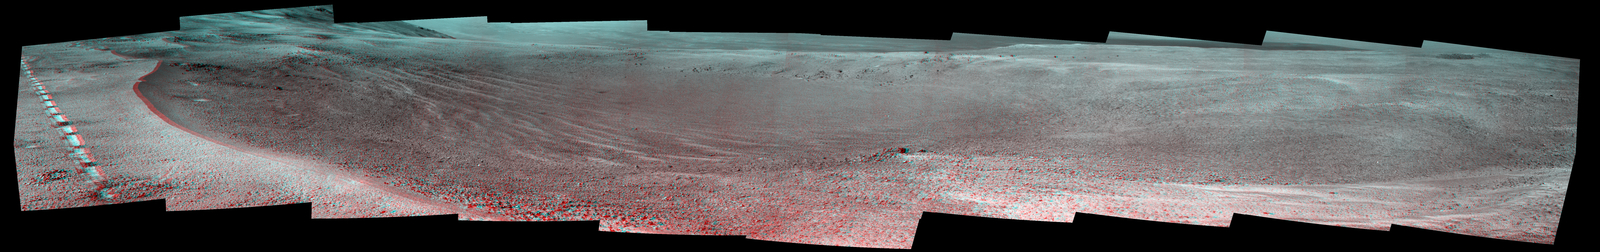 This view of a 90-foot-wide, relatively fresh crater on Mars, "Orion Crater," combines images from the left eye and right eye of the Panoramic Camera (Pancam) on NASA's Mars Exploration Rover Opportunity. It appears three-dimensional when seen through blue-red glasses with the red lens on the left.